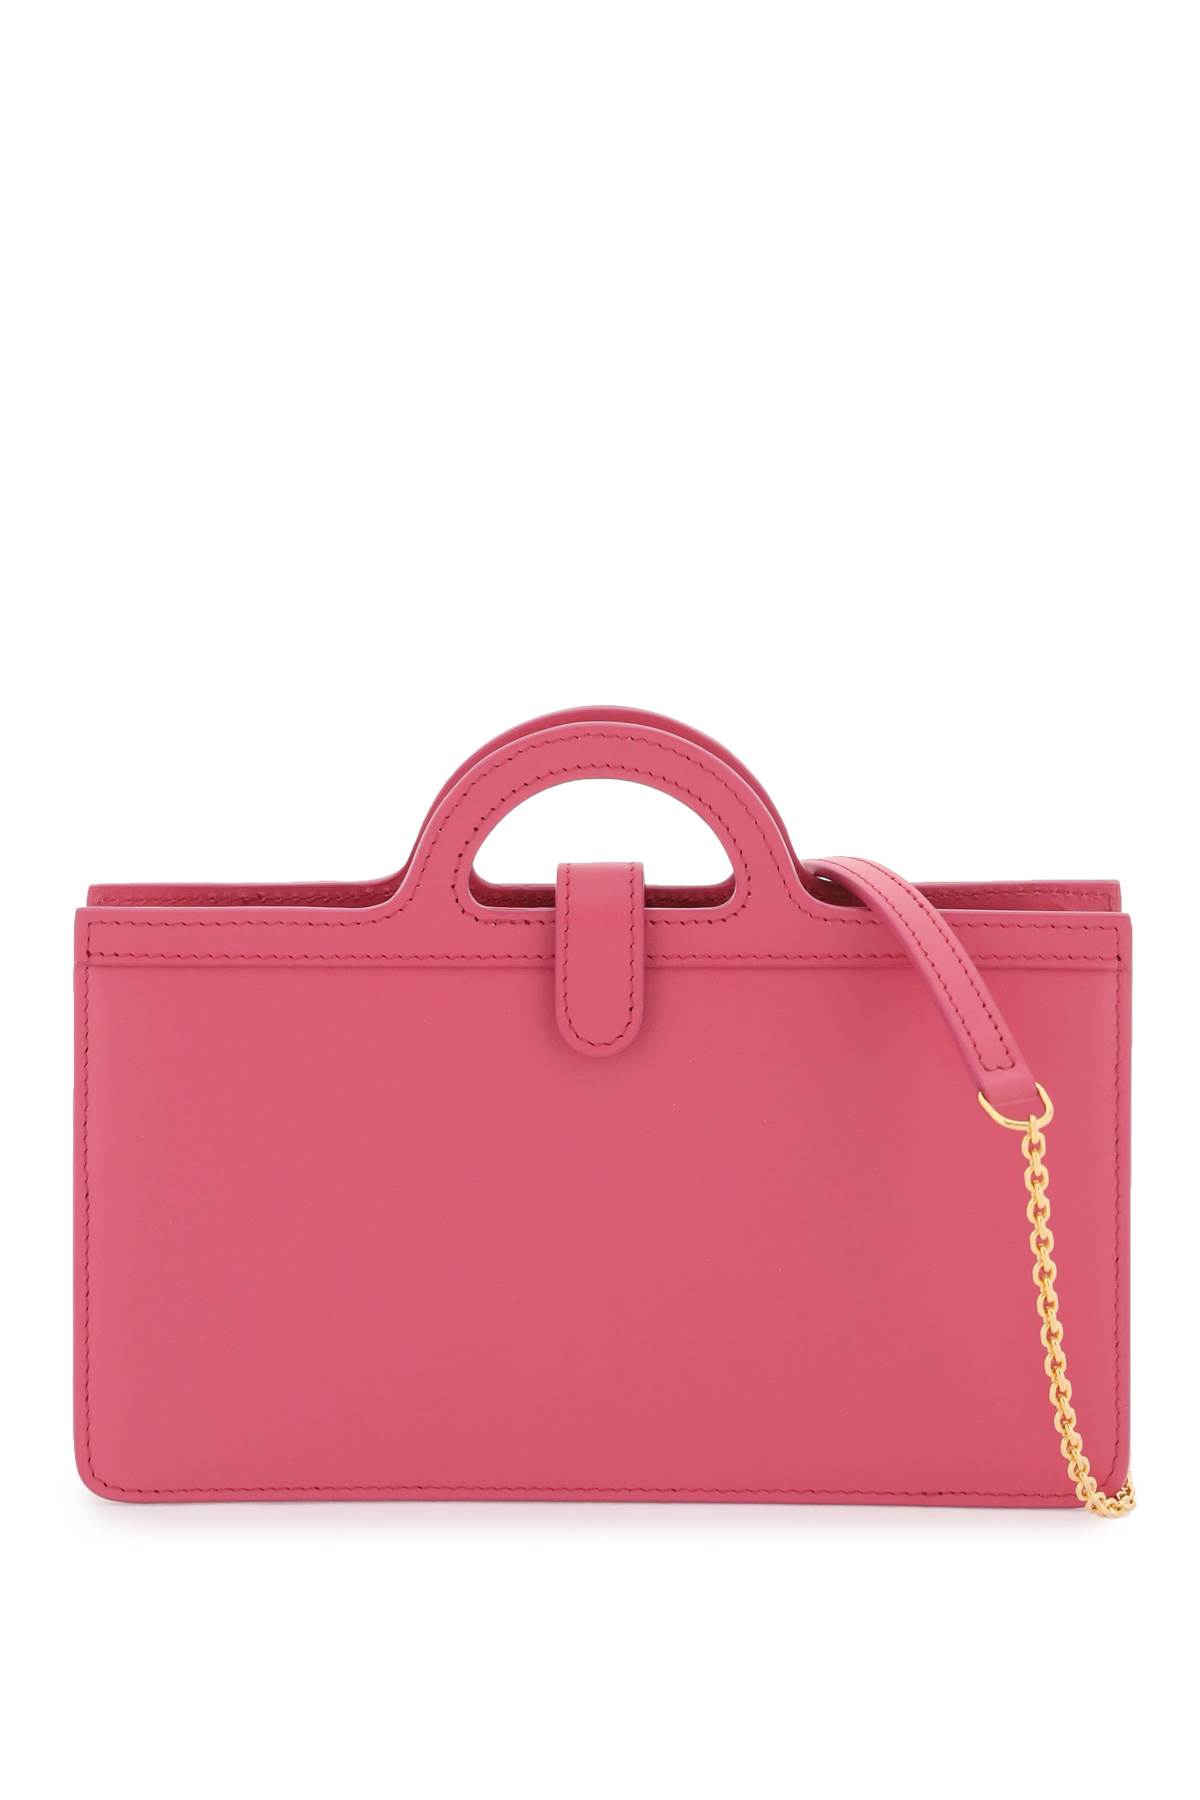 Marni Wallet Trunk Bag In Pink